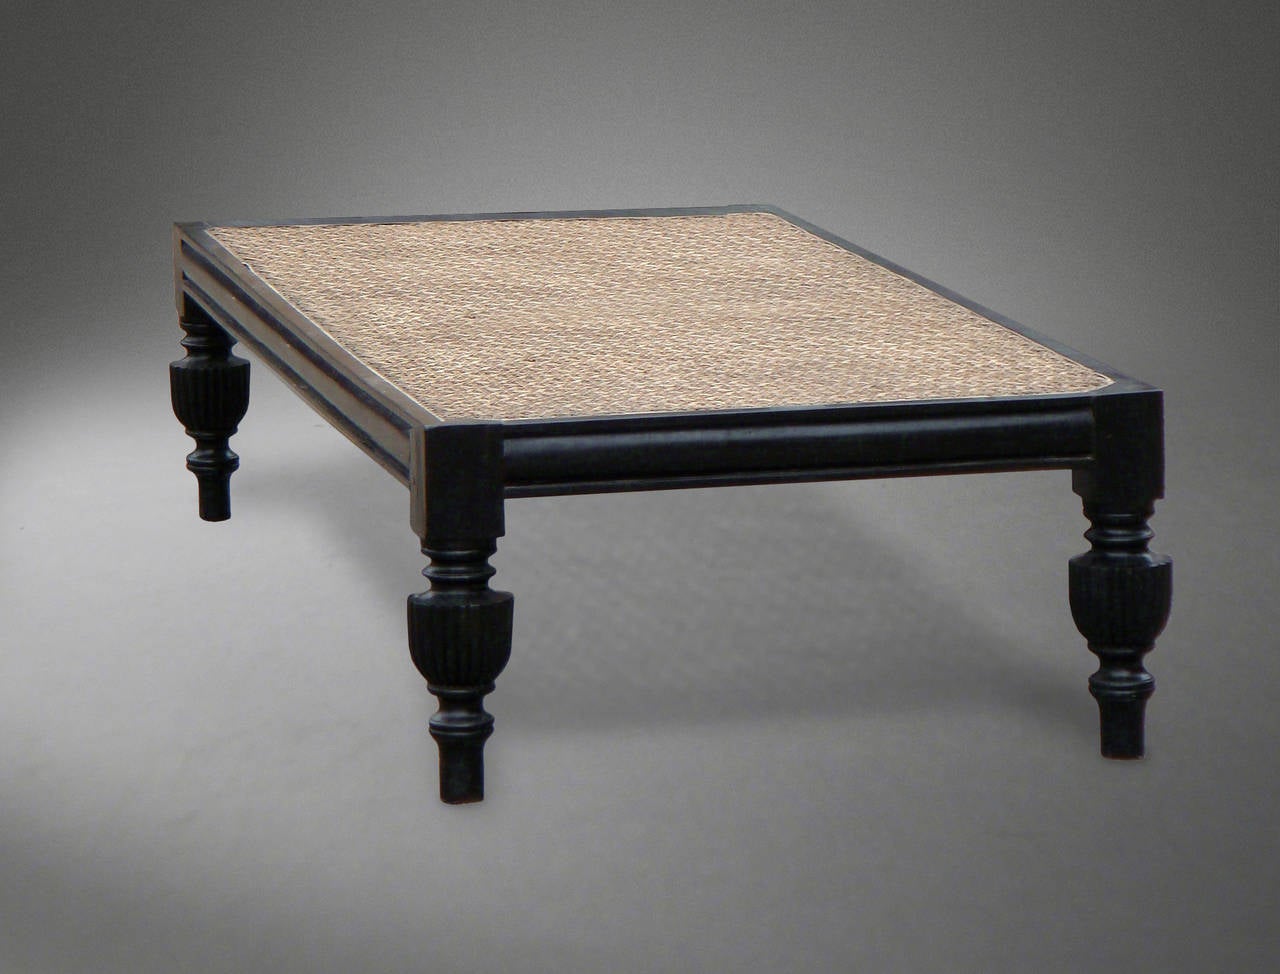 Anglo-Ceylonese Low Table in Solid Ebony with a Hard Caned Covered Top

Originally it had a large upholstered swab cushion